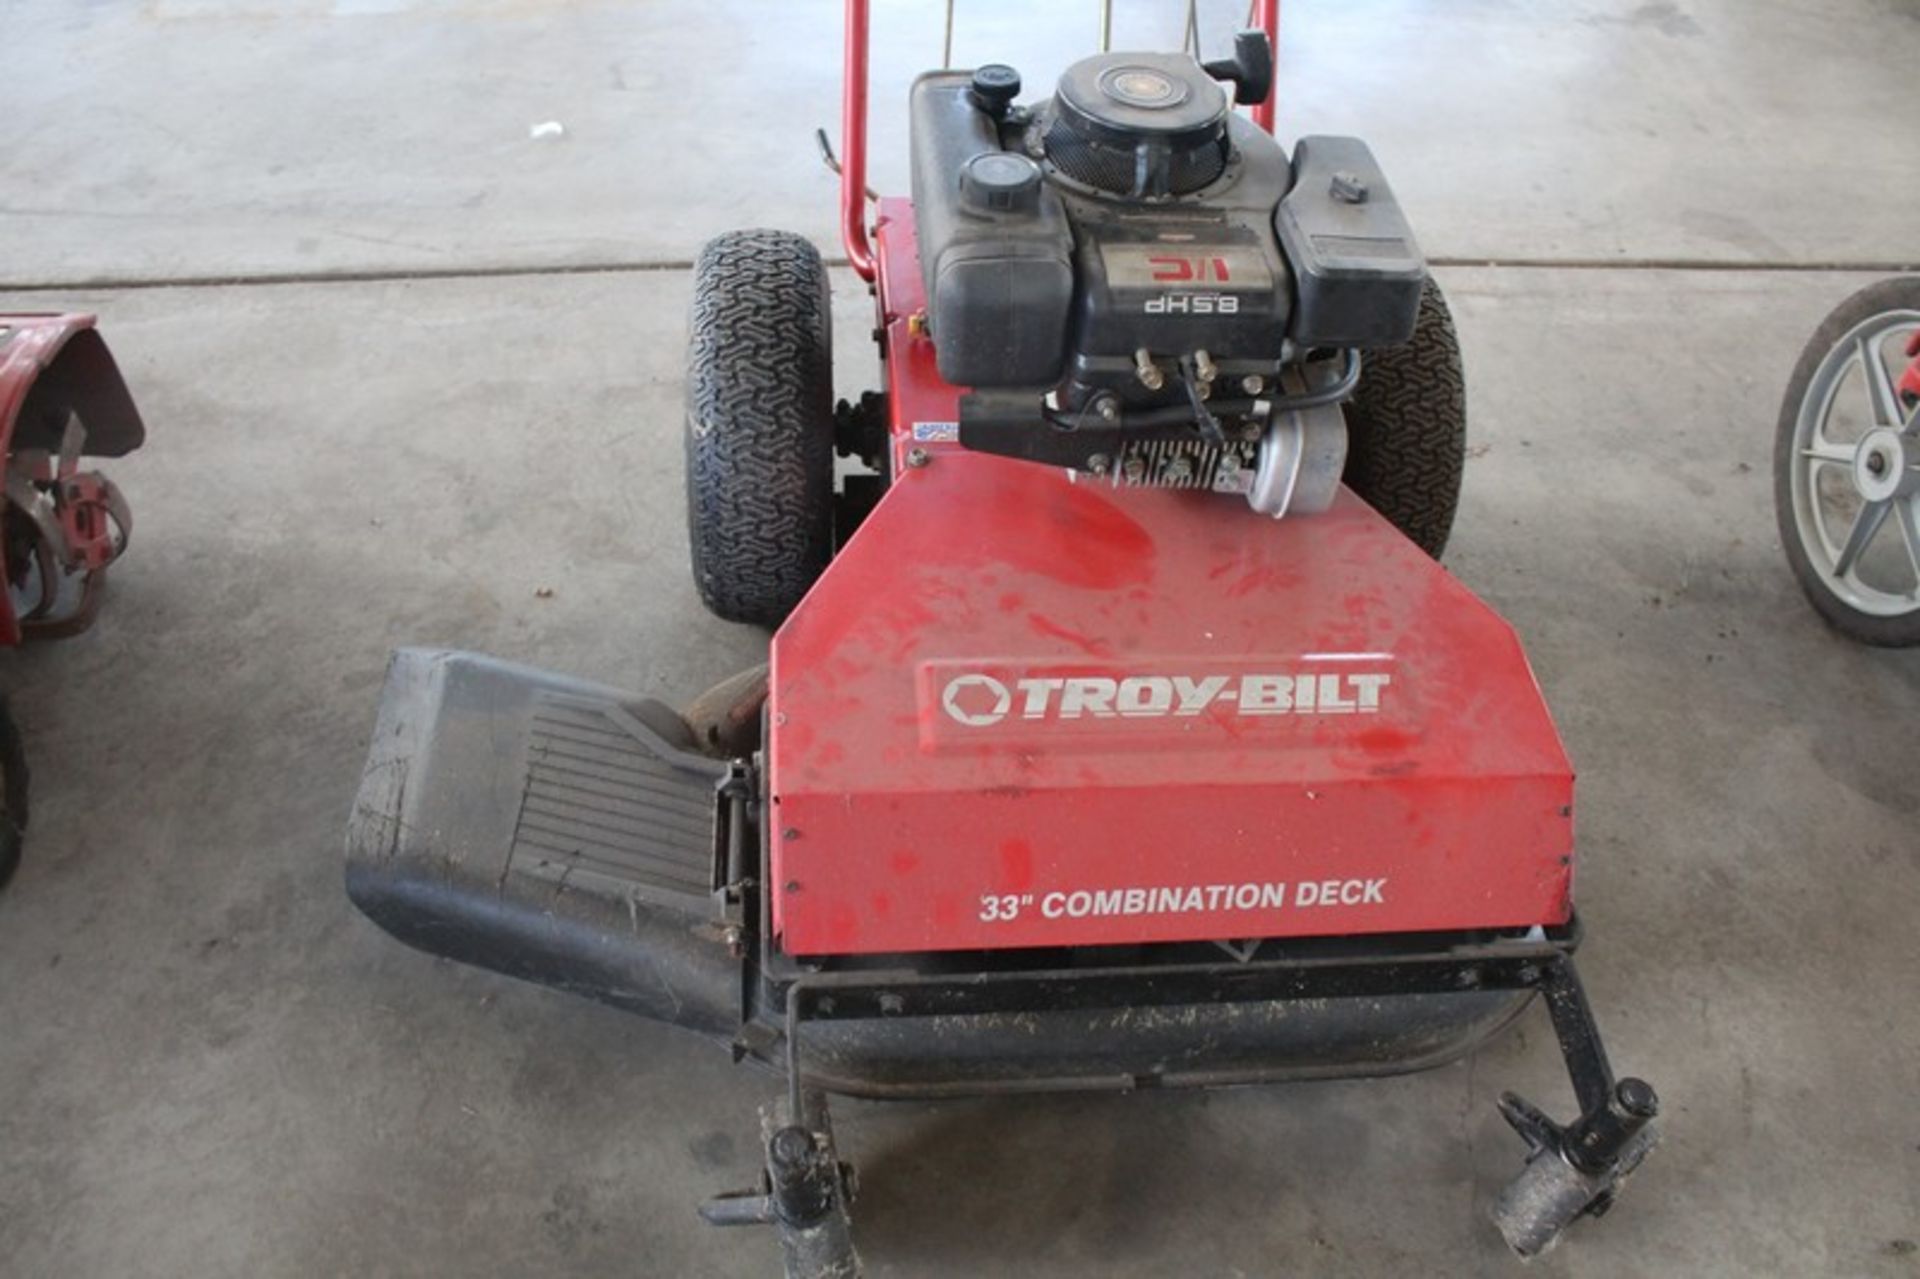 TROY BILT 33" WIDE-CUT MOWER WITH 8.5HP BRIGGS & STRATTON ENGINE - Image 2 of 3